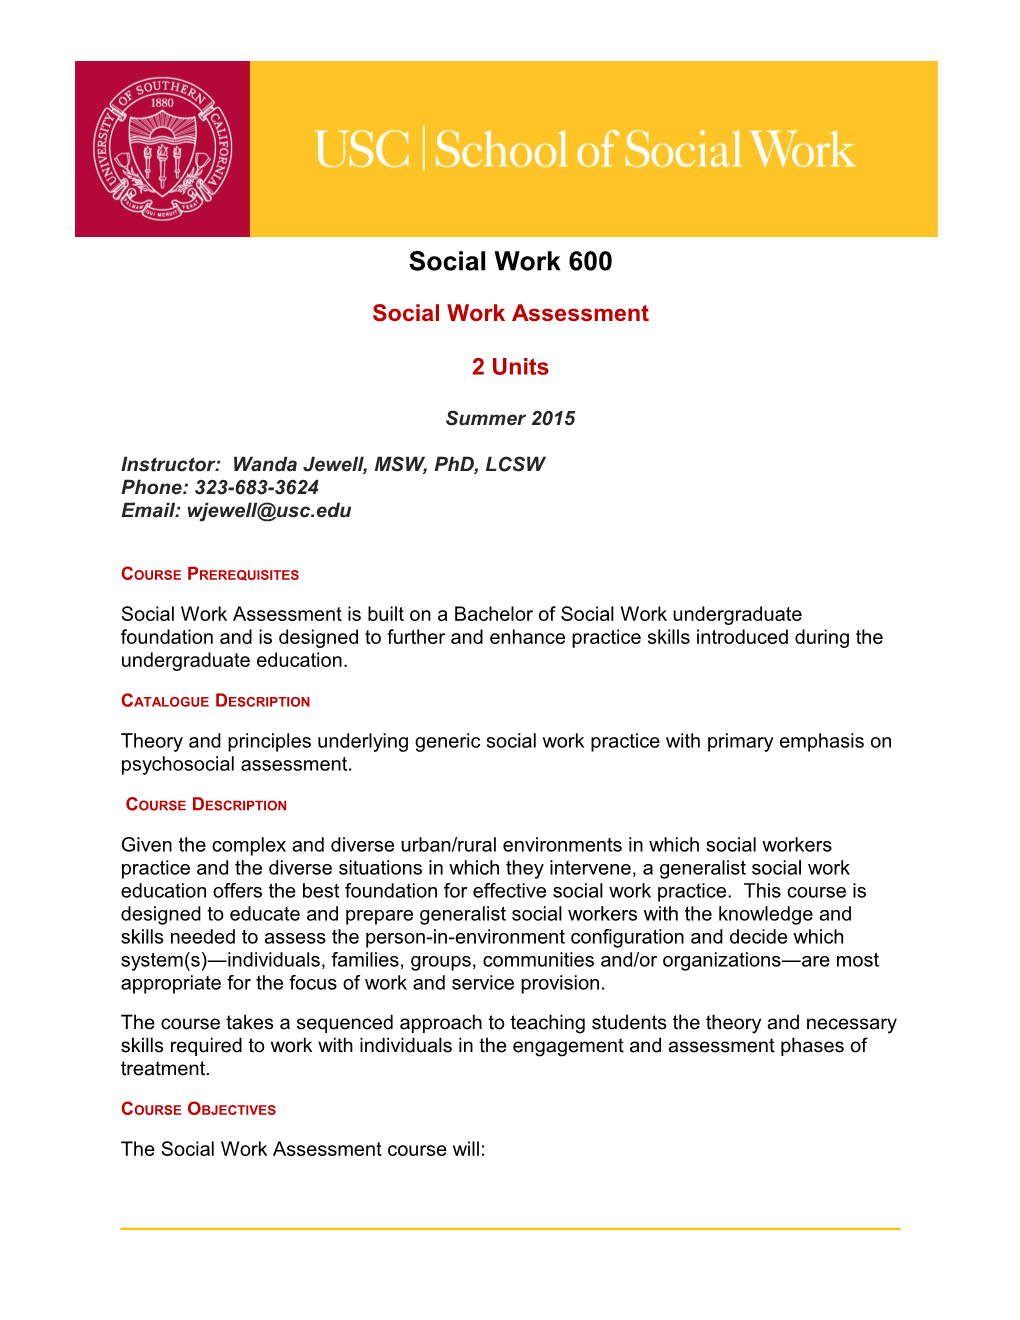 School of Social Work Syllabus Template Guide s1